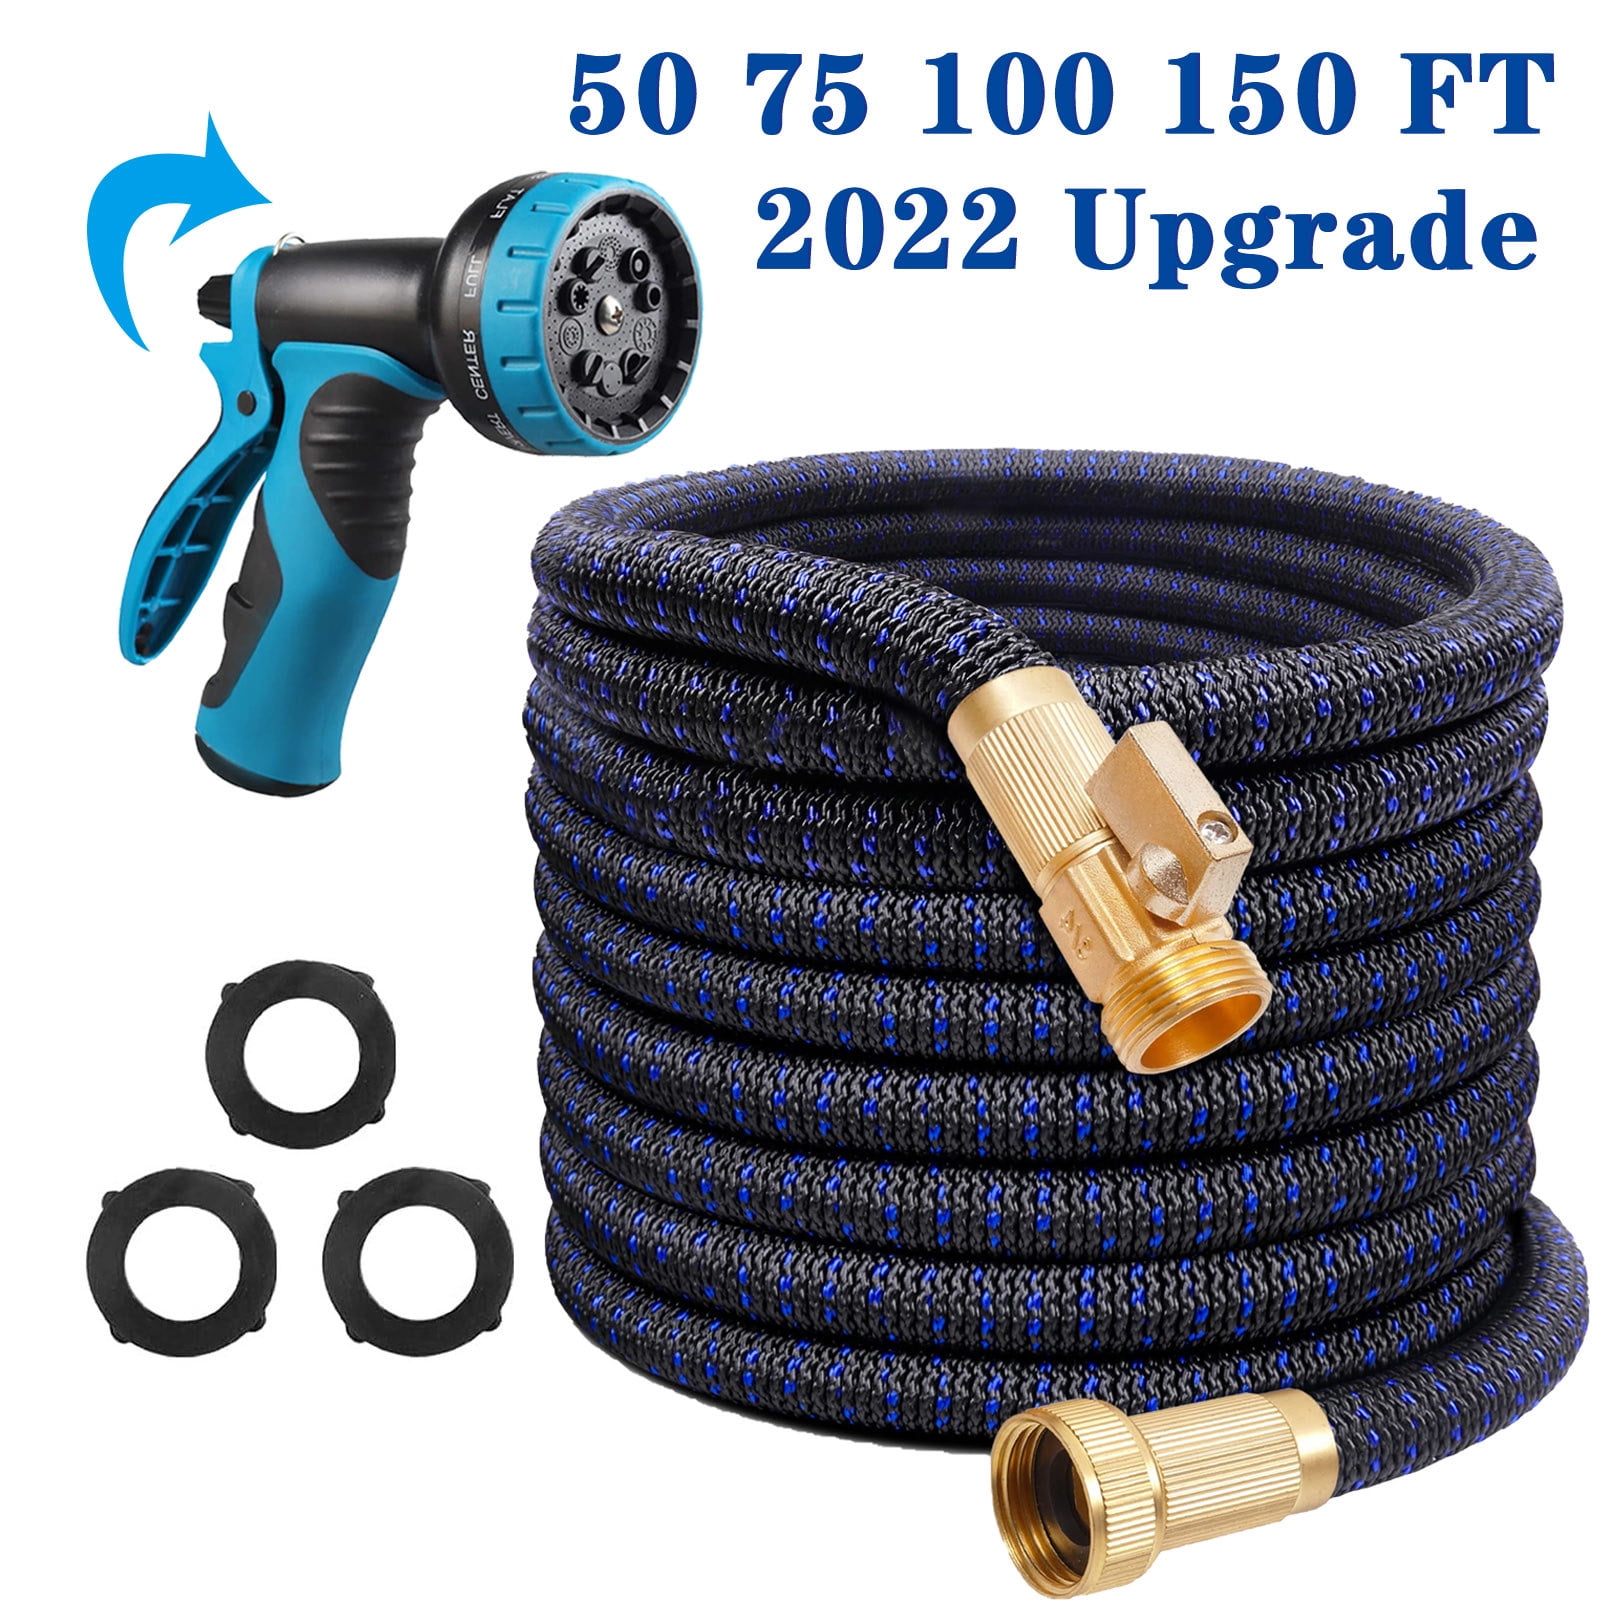 Yard Hoses 100ft Expandable Garden Hose Durable 4-Layers Latex 10 Function Spray Nozzle Flexible Water Hose with 3/4 Solid Brass Valve